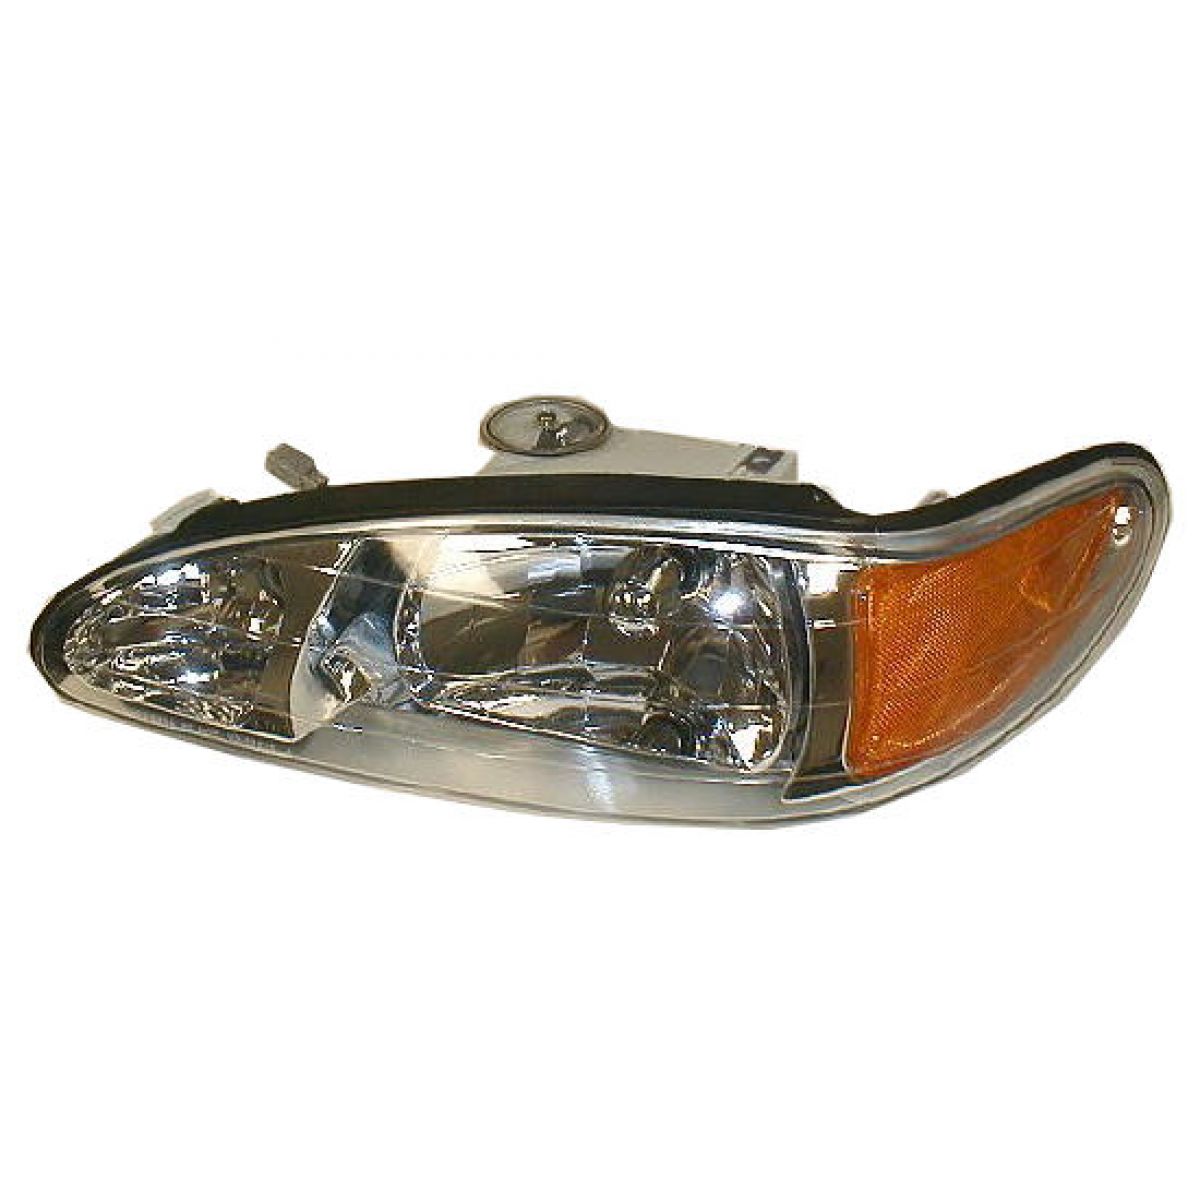 99 Ford escort headlight replacement #4